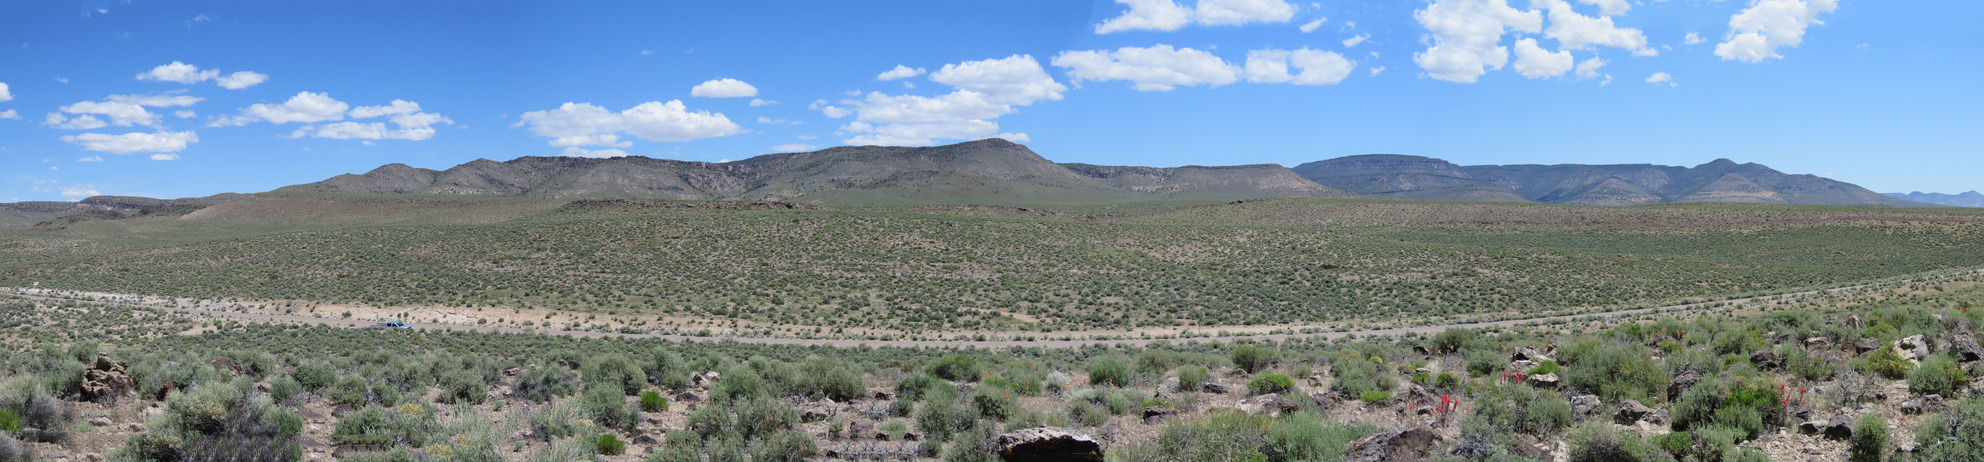 A panorama of Caldera Rim, a part of the Timber Mountain Caldera Complex. The dry landscape is filled with sage and other shrubs.